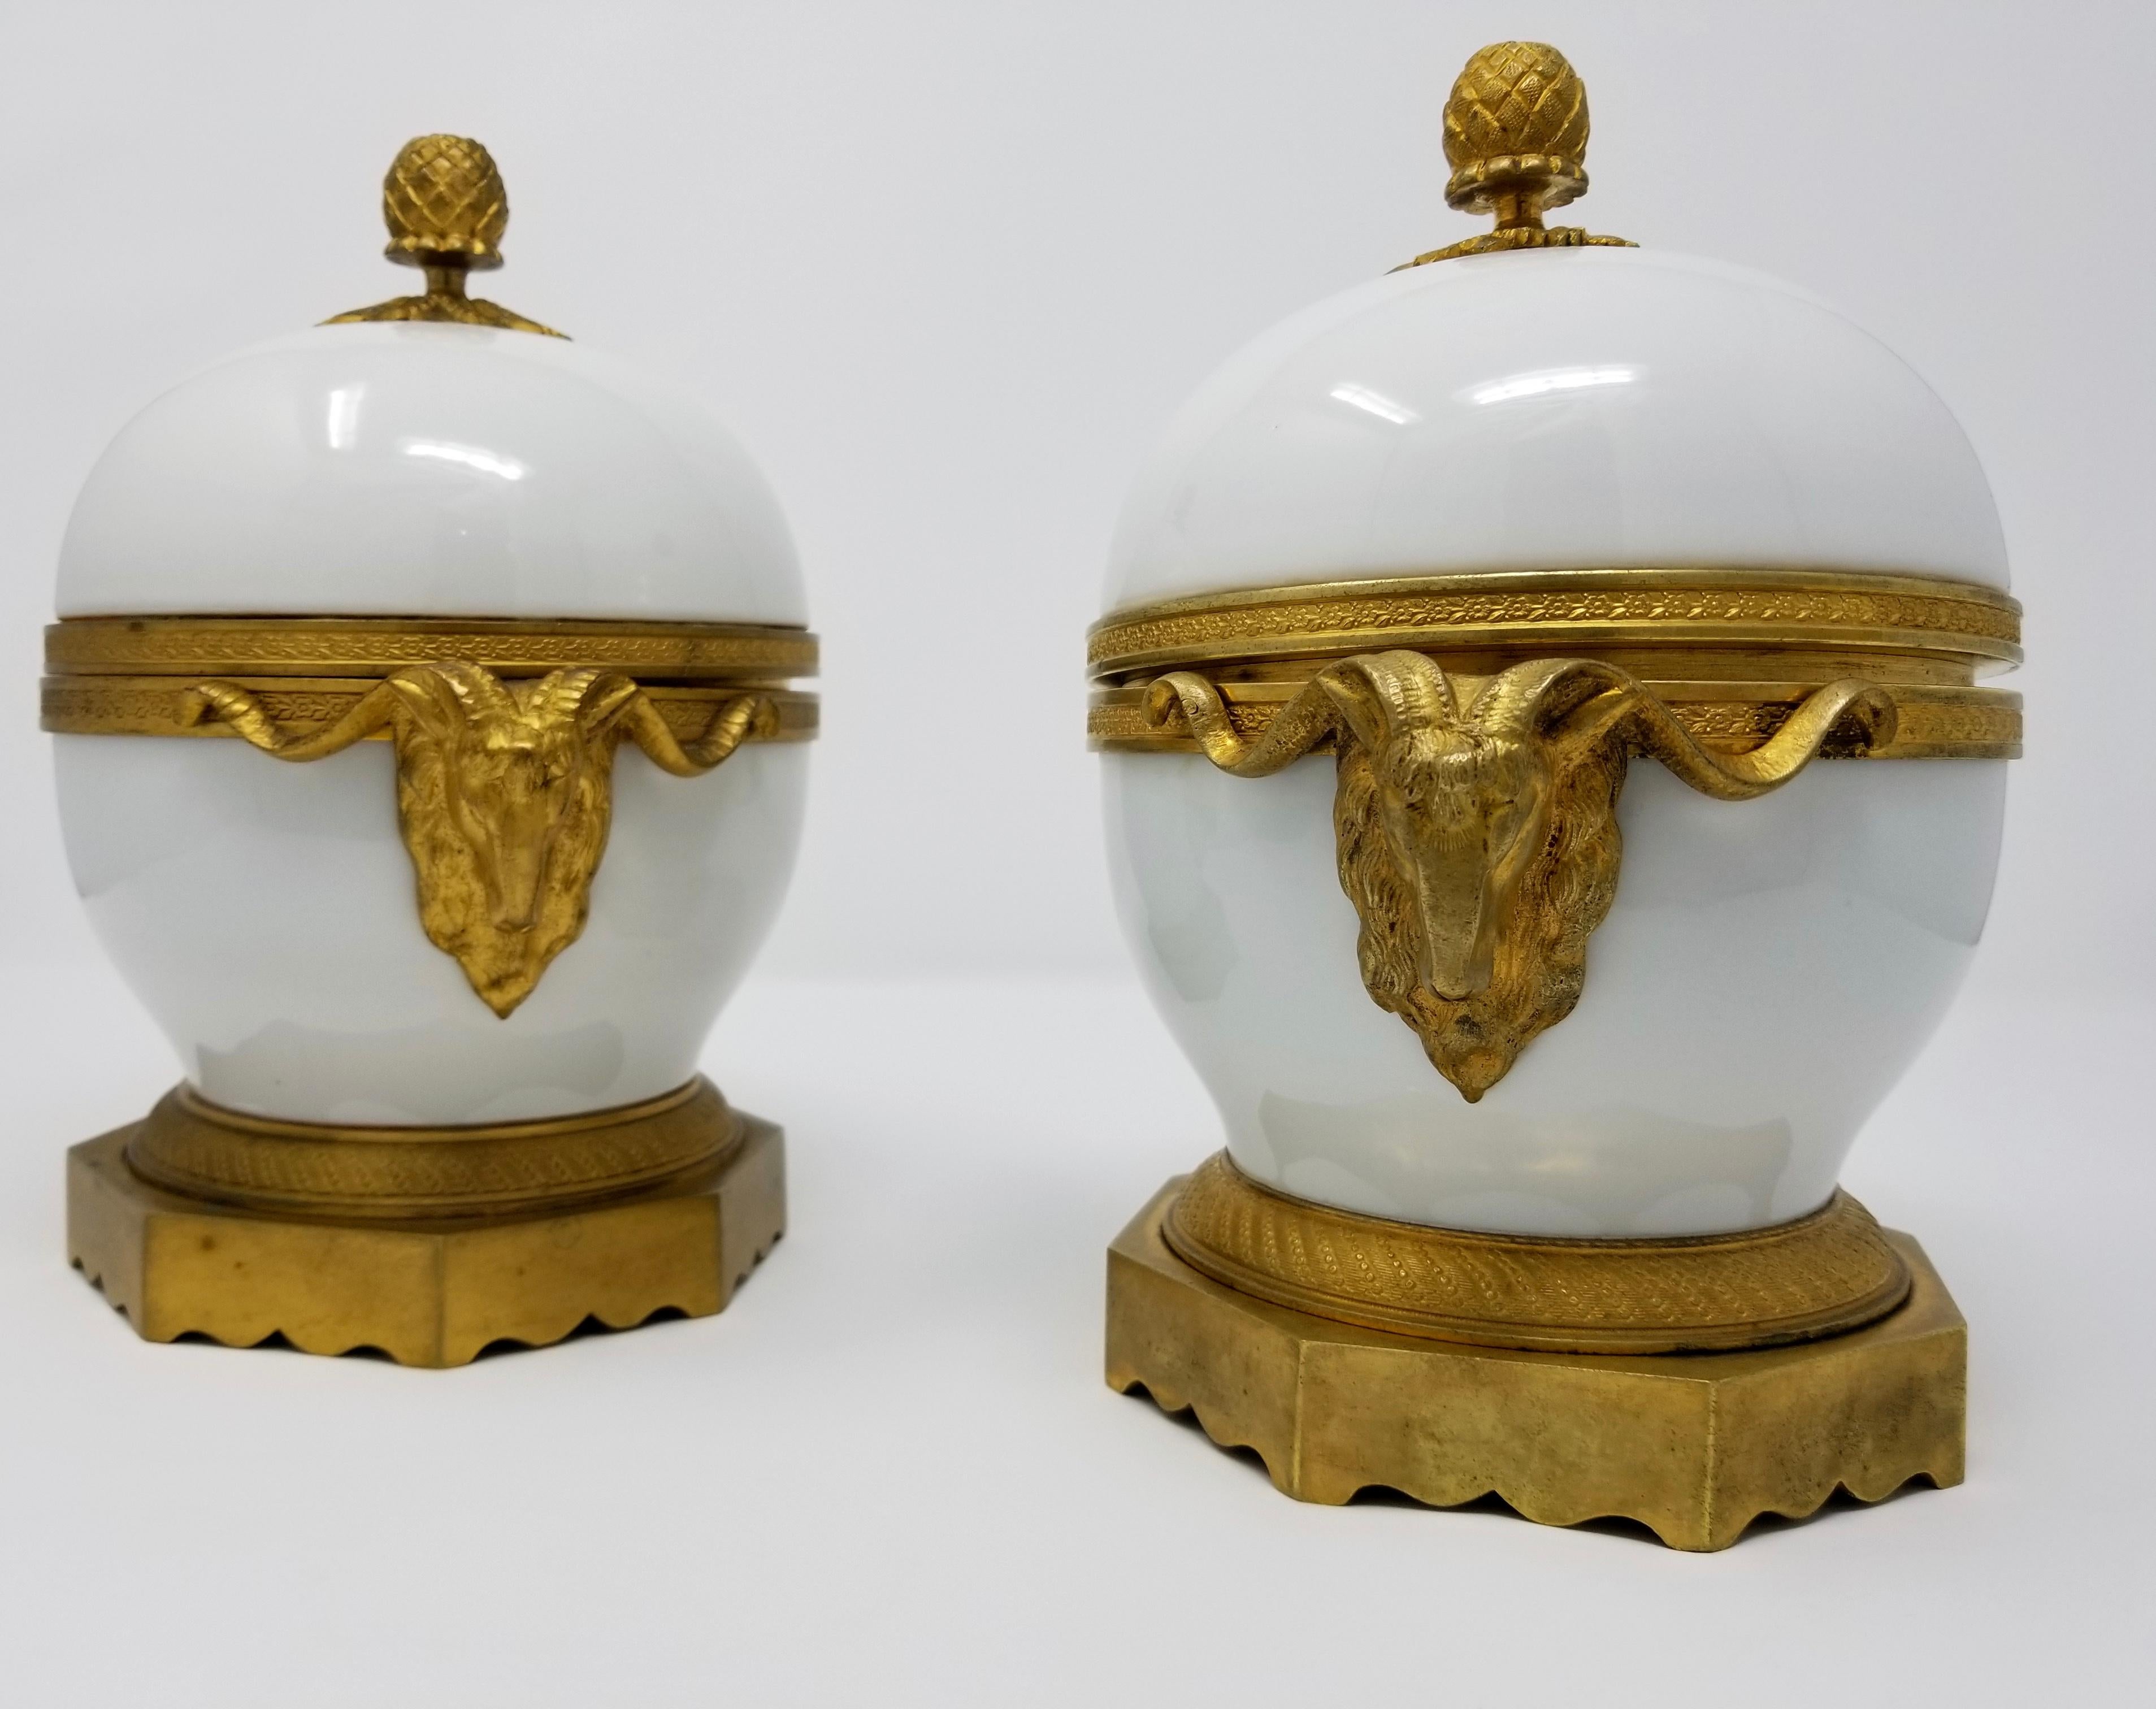 A beautiful pair of 19th century Louis XVI style French ormolu-mounted white porcelain and doré bronze ram's head handle covered bowls. Each bowl is of the finest French opaque white porcelain, with gorgeous hand chased doré bronze mounts, rams